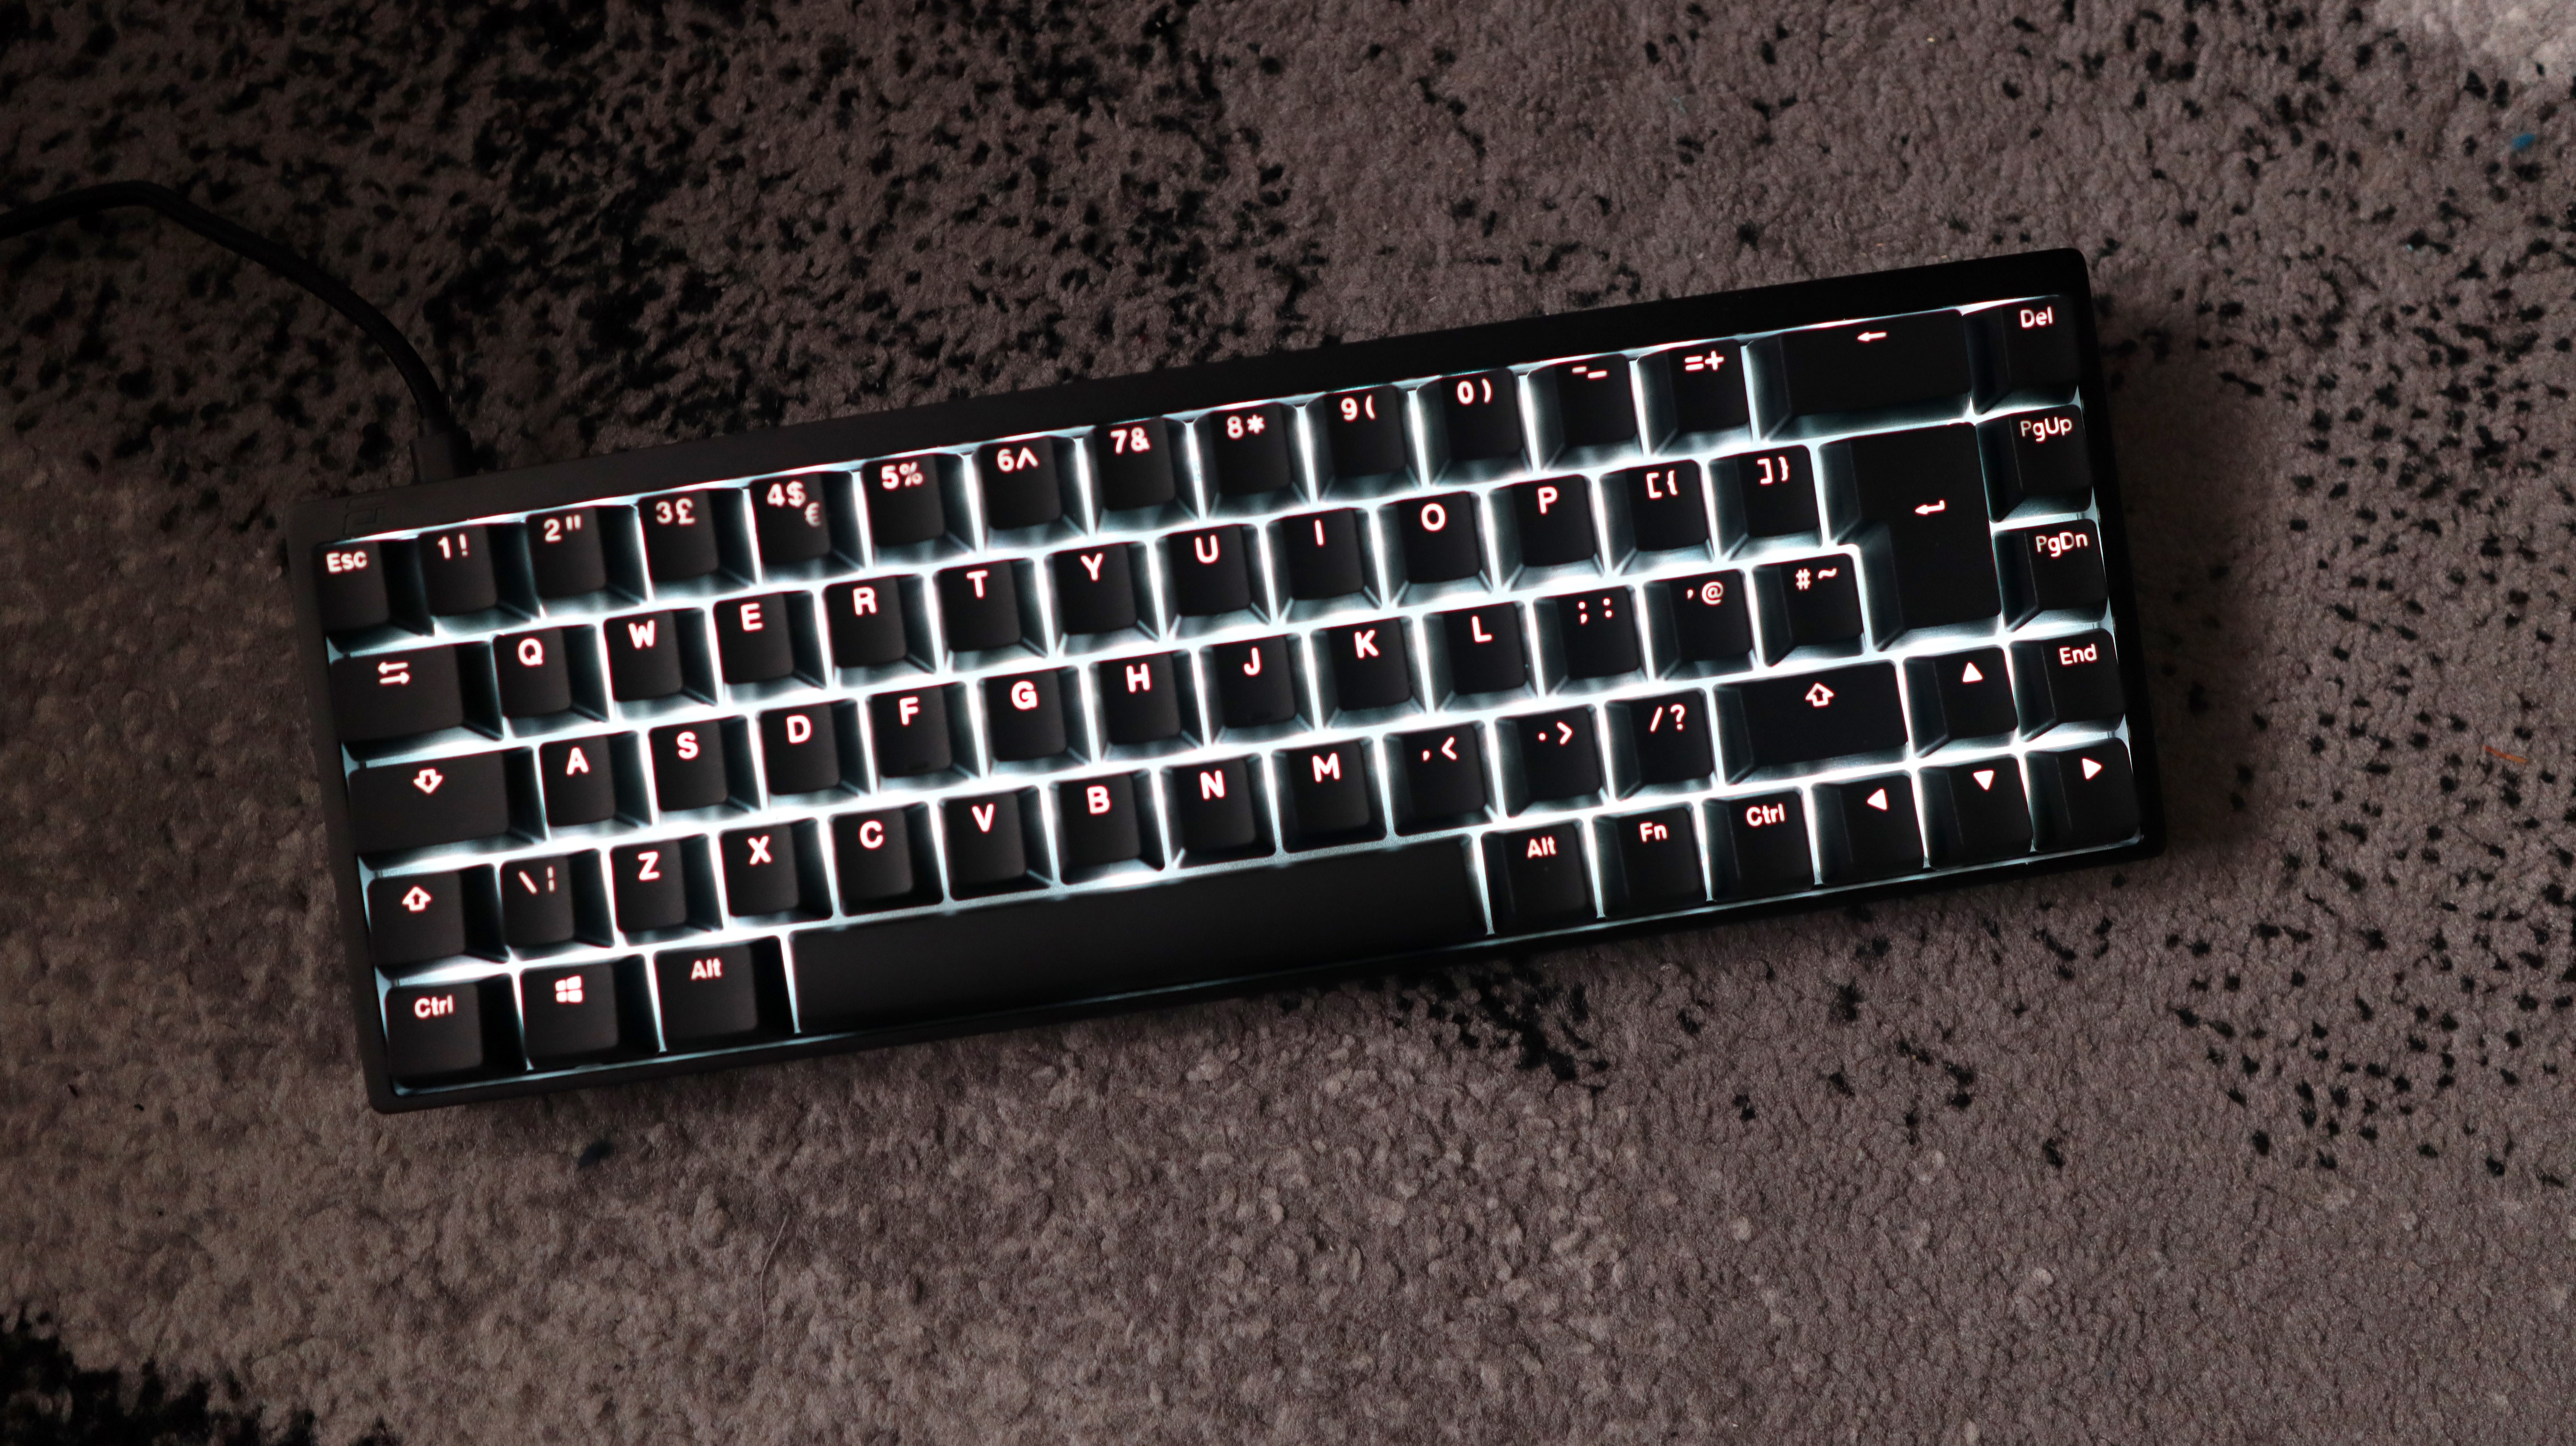  Endgame Gear KB65HE review 